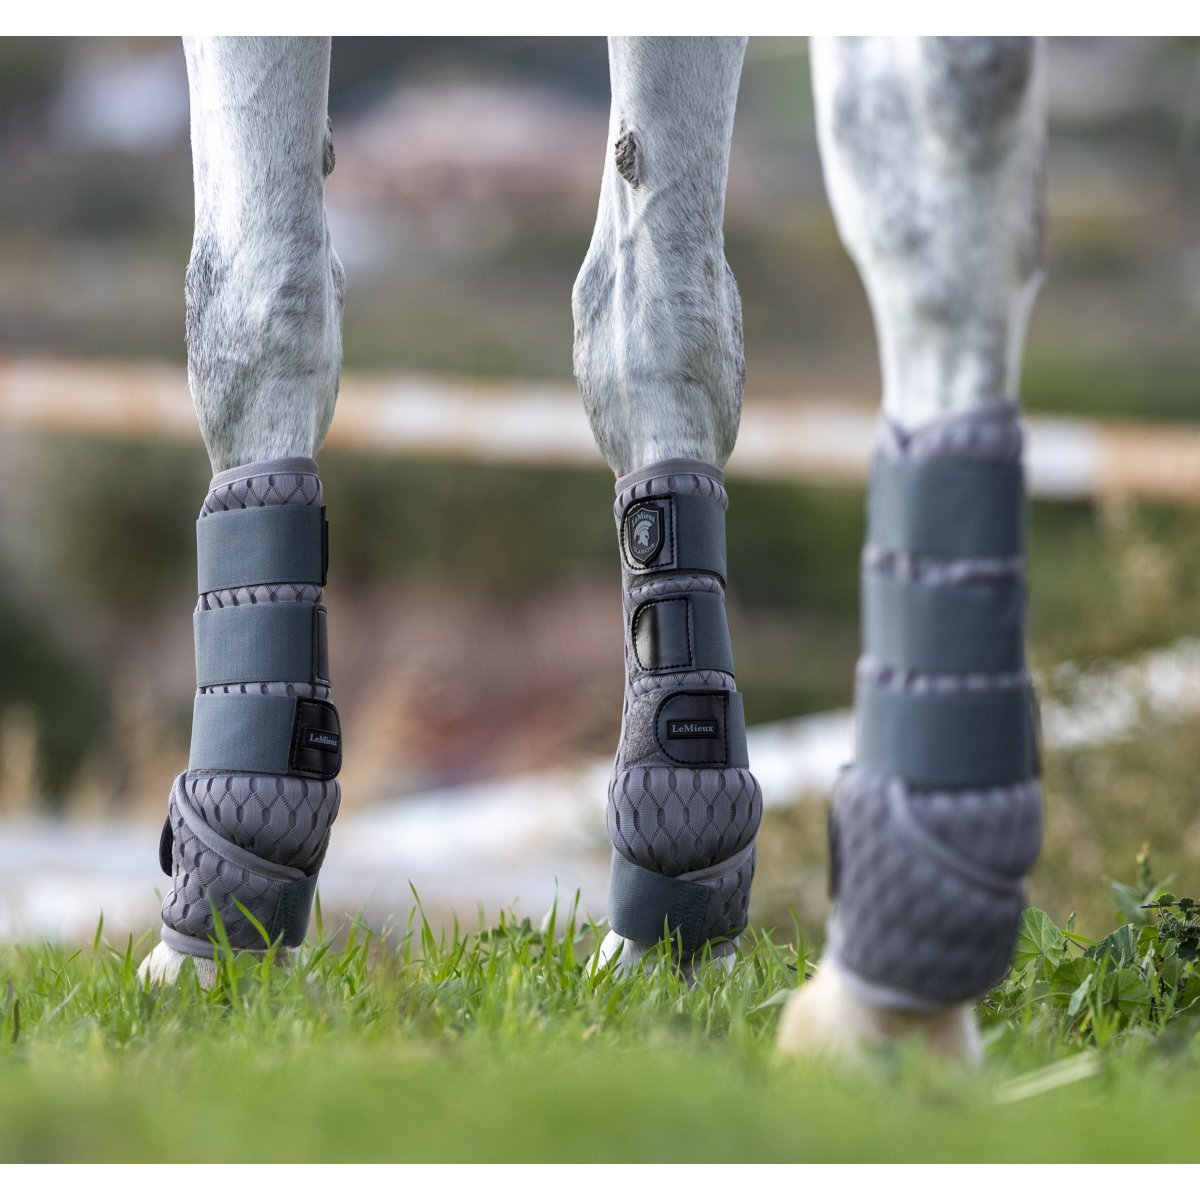 Horse wearing protective fly boots.